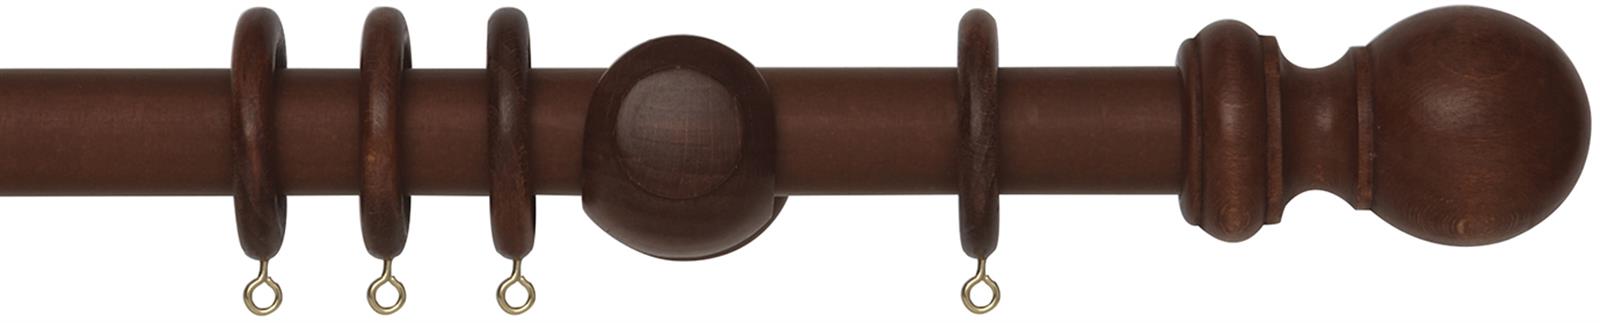 Woodline 28mm 35mm Curtain Pole Rosewood